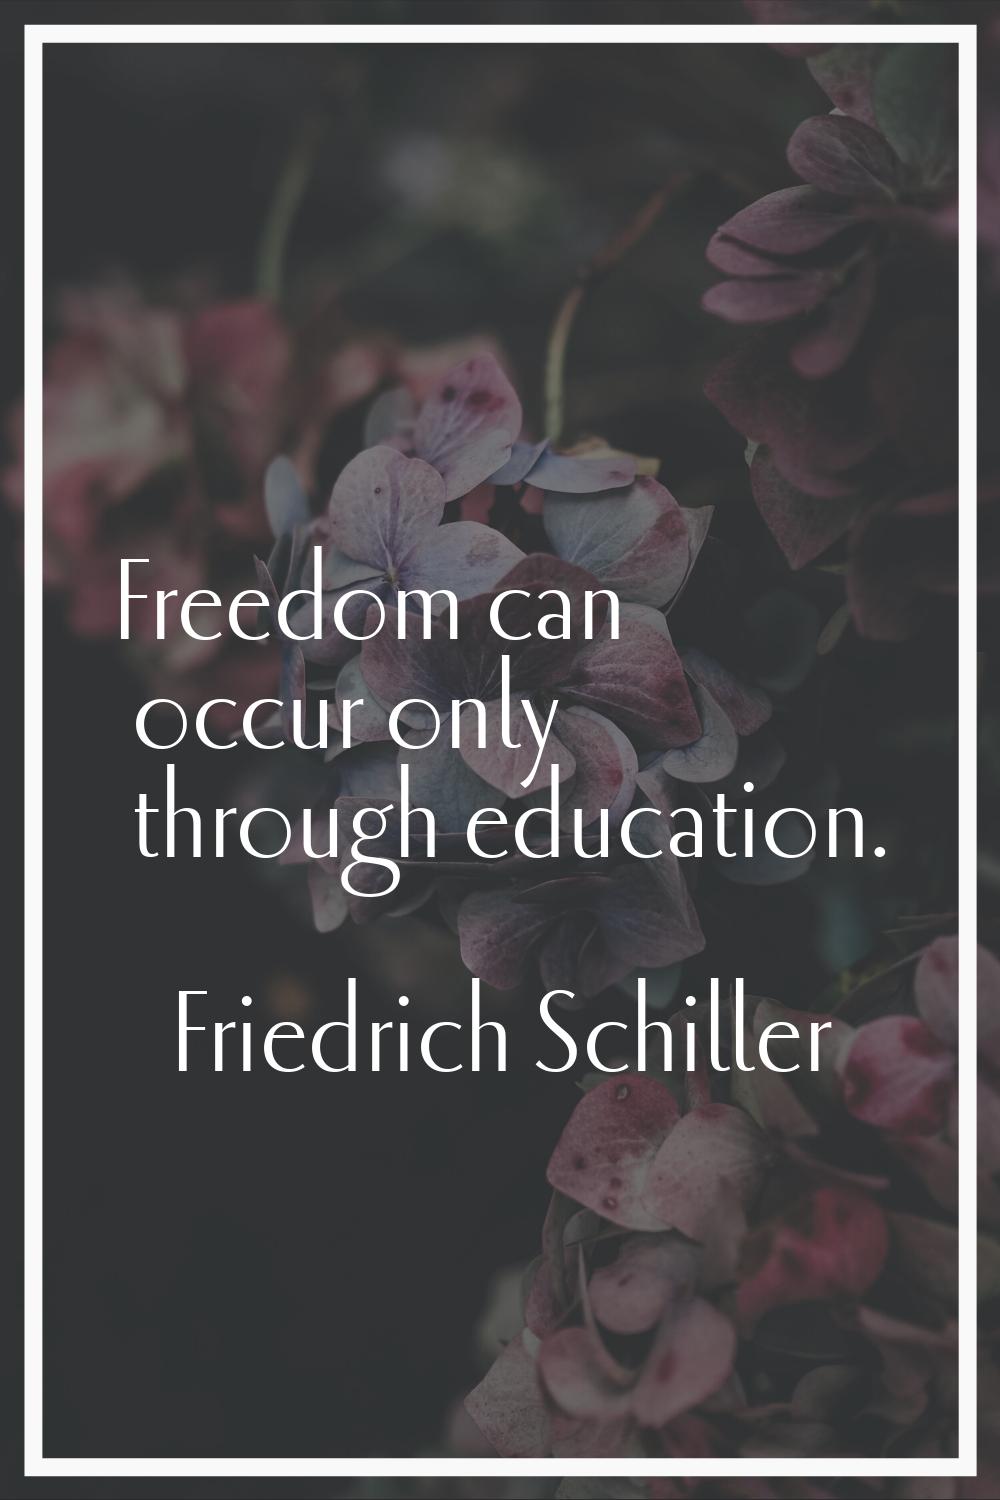 Freedom can occur only through education.